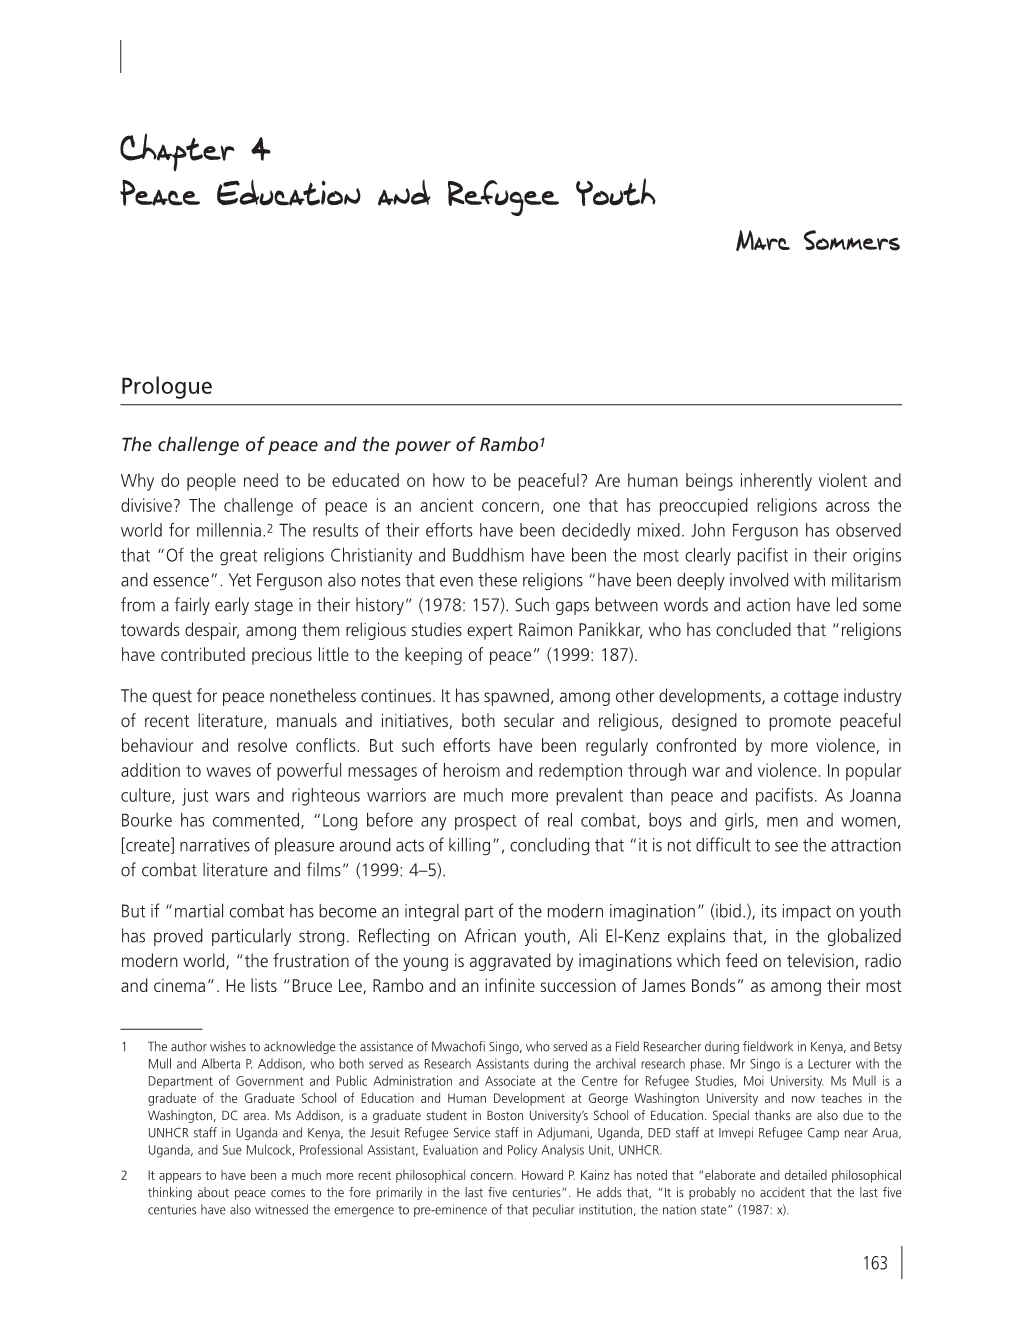 Chapter 4 Peace Education and Refugee Youth